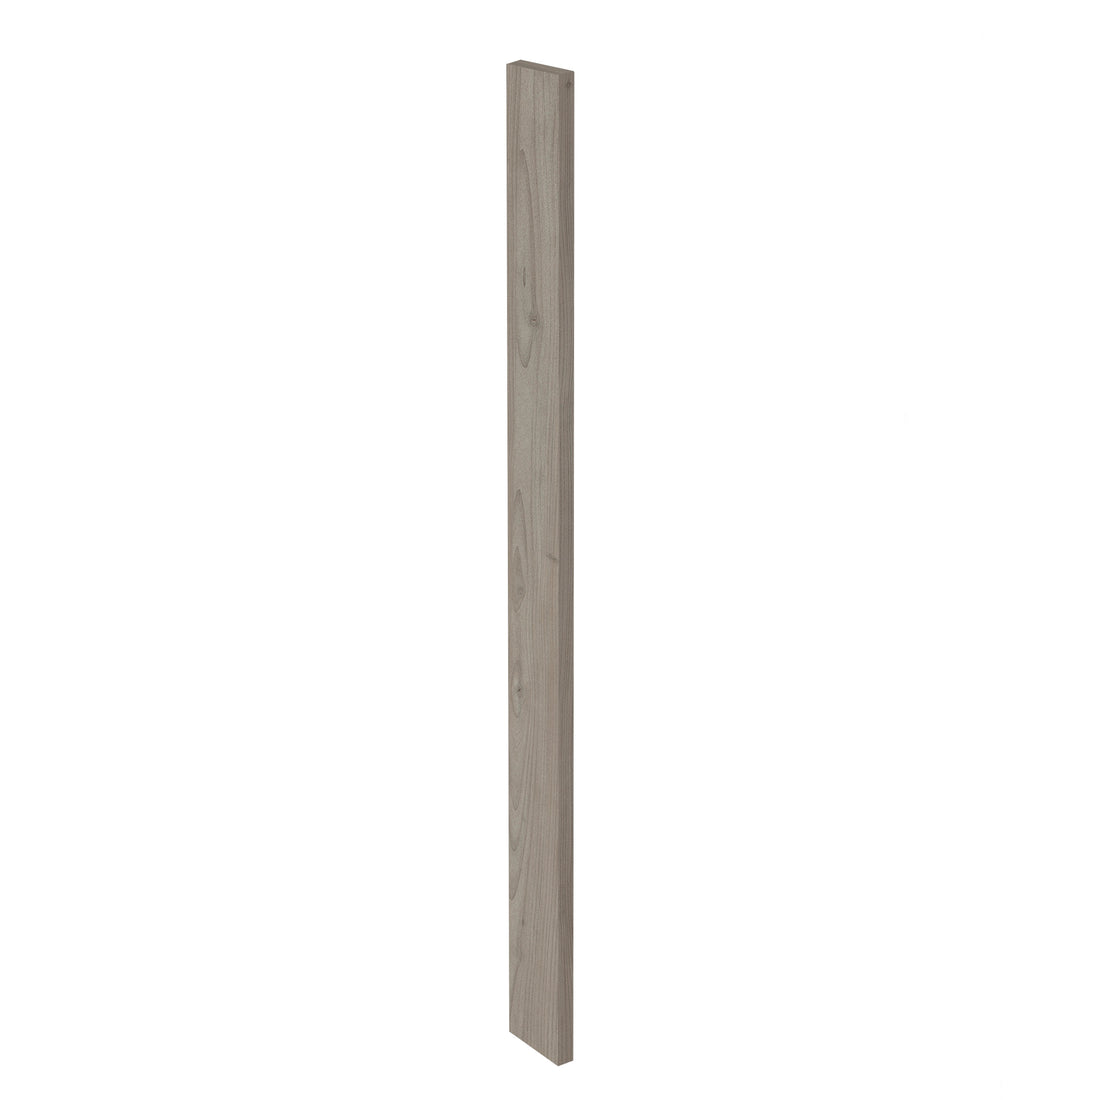 Grey Nordic Slab Style Kitchen Cabinet Filler (3 in W x 0.75 in D x 34.5 in H) -  Pro-Edge HD